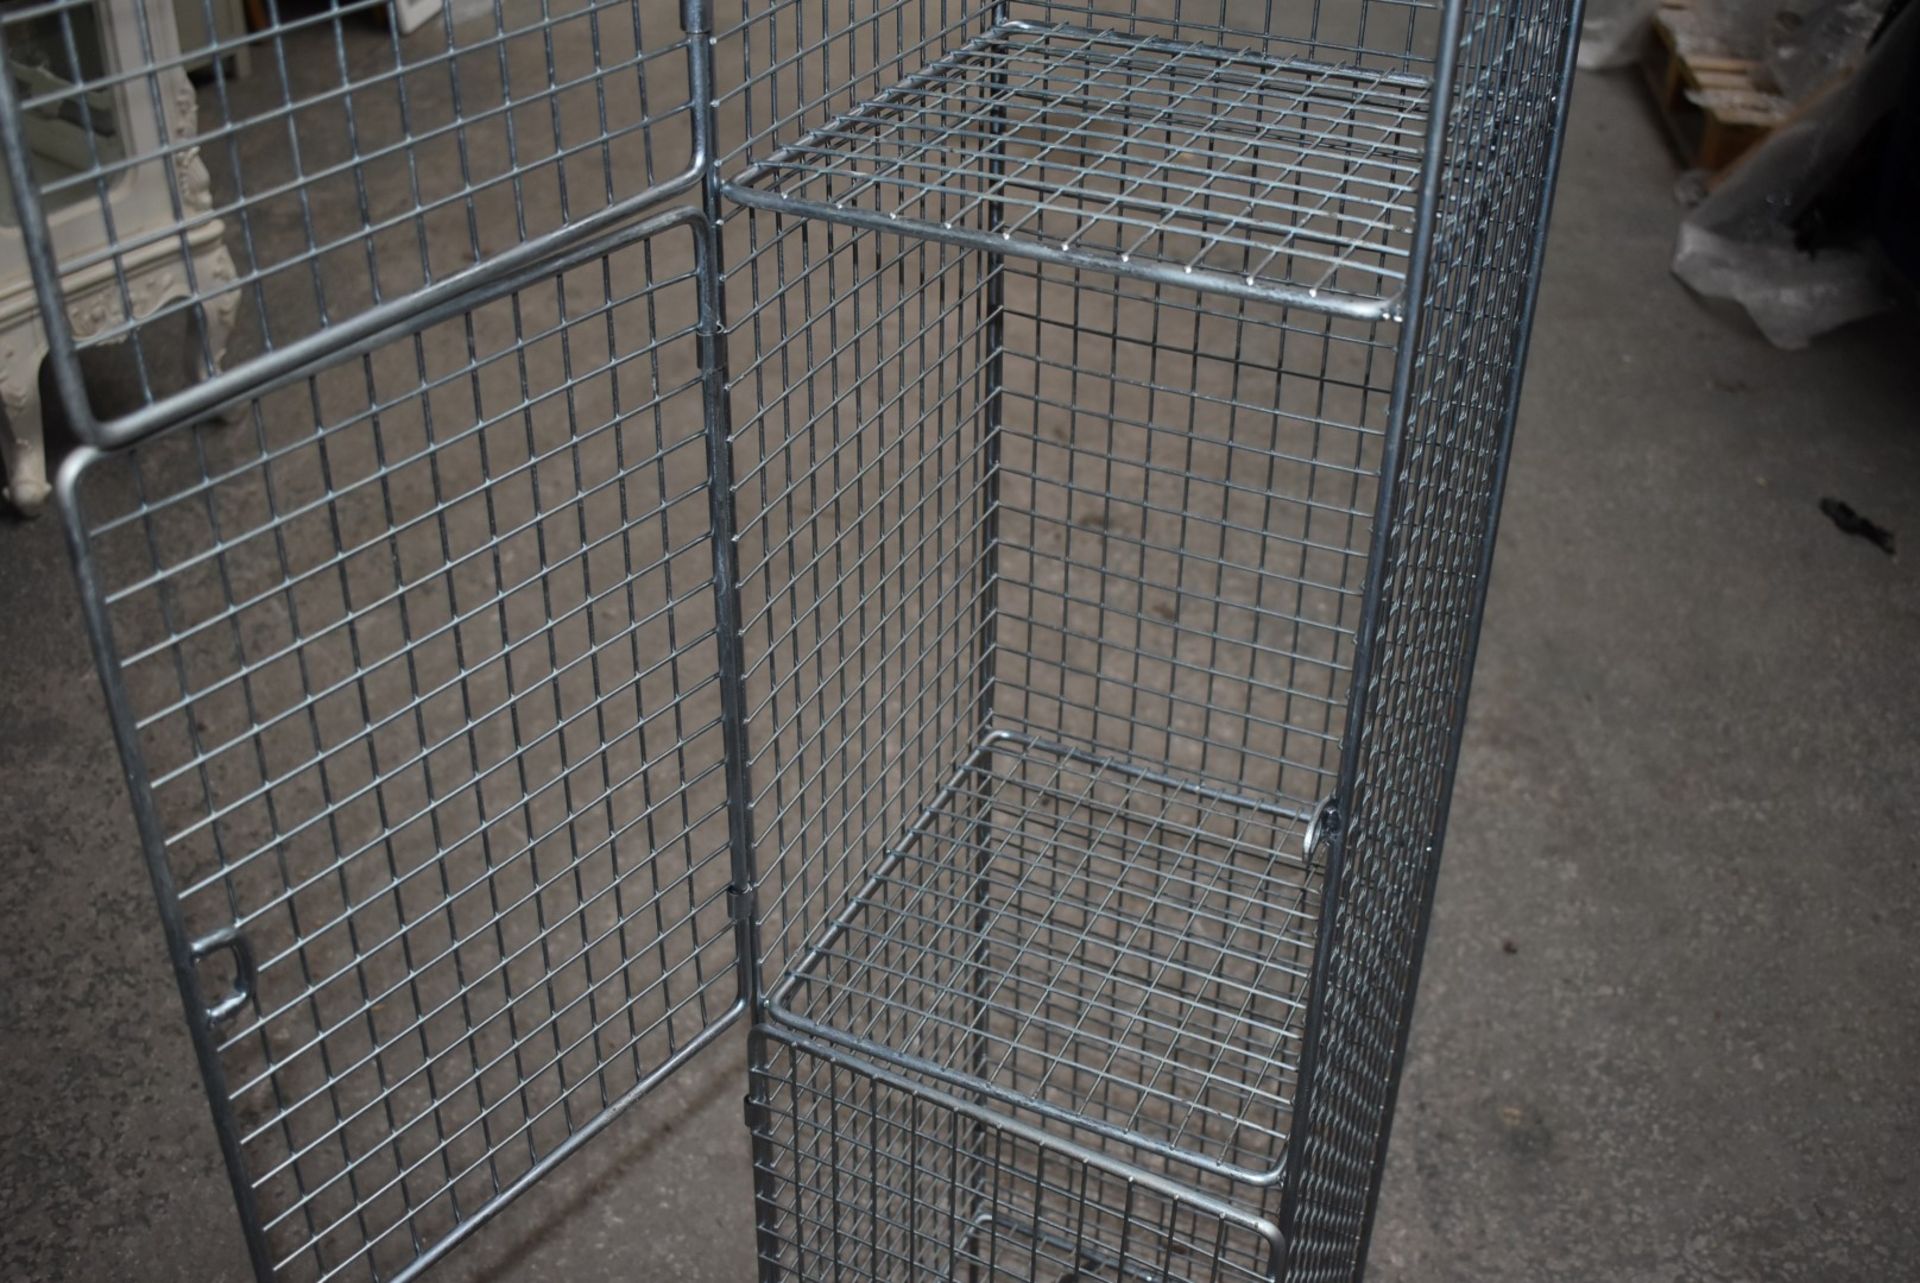 1 x Wire Mesh Cage Lockers With Four Locker Compartments - Dimensions: H193 x W30 x D32 cms - Ref: - Image 9 of 11